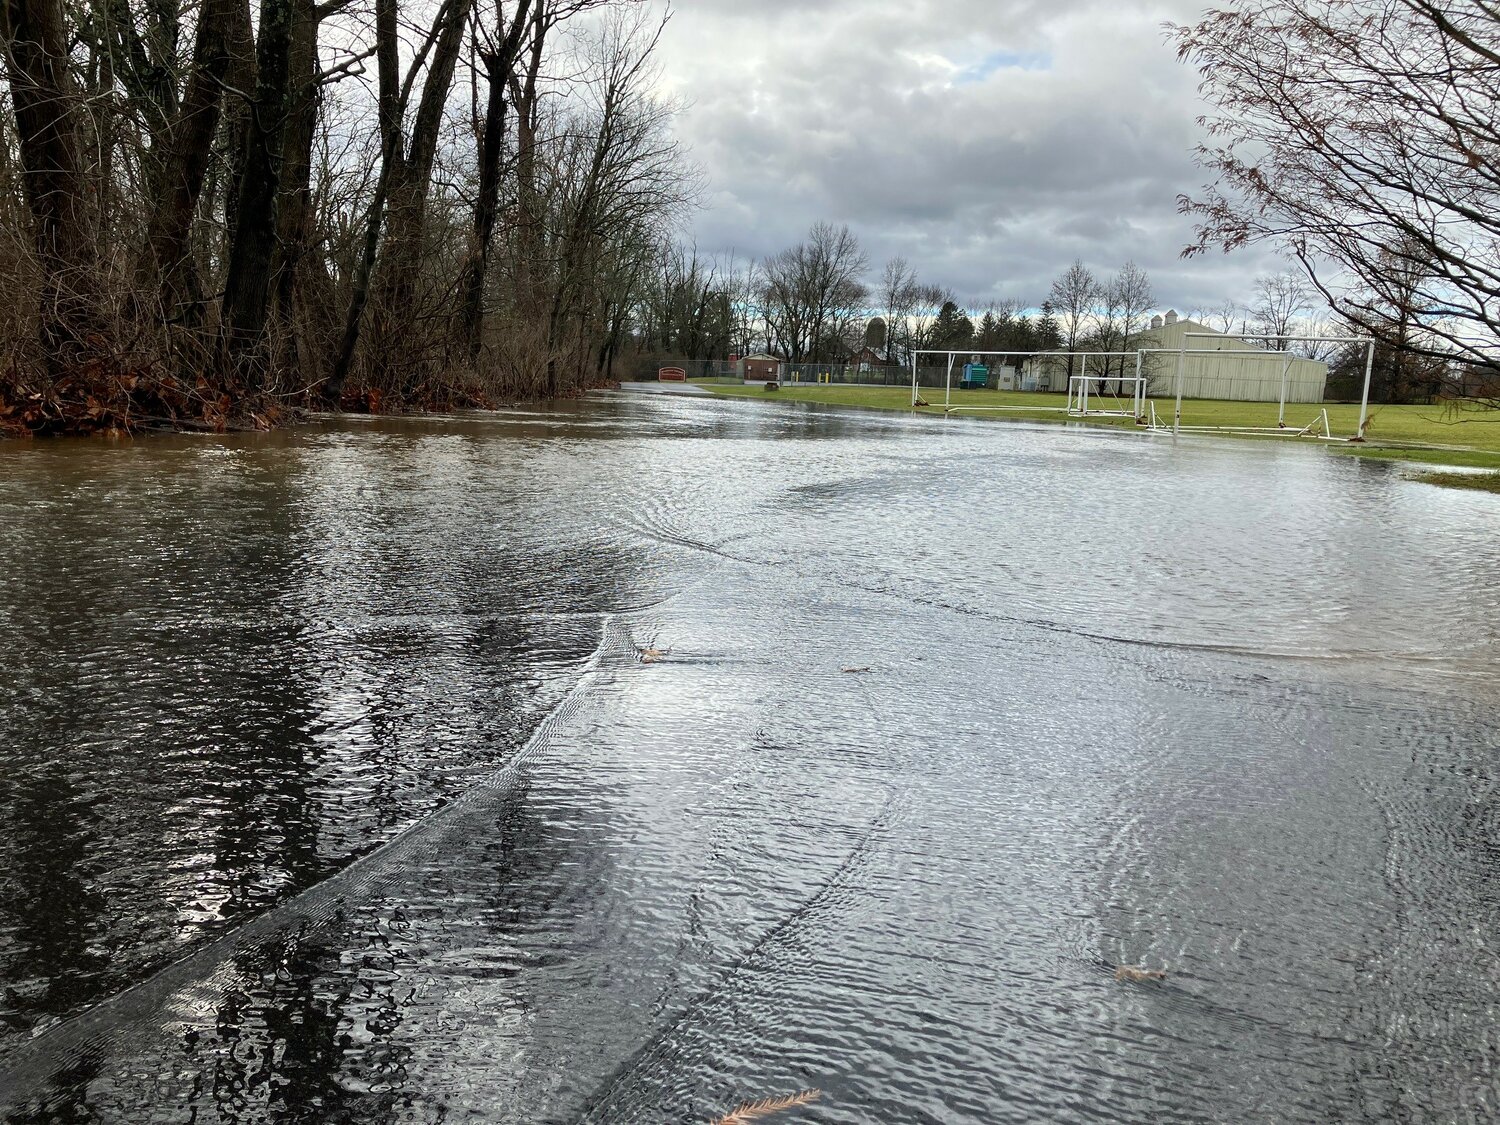 Lahaska Creek overflowed its banks Monday morning, flooded an access road to the Buckingham Elementary School property. The school was closed, Buckingham EMS officials said on Twitter, because of the resulting "access issues."